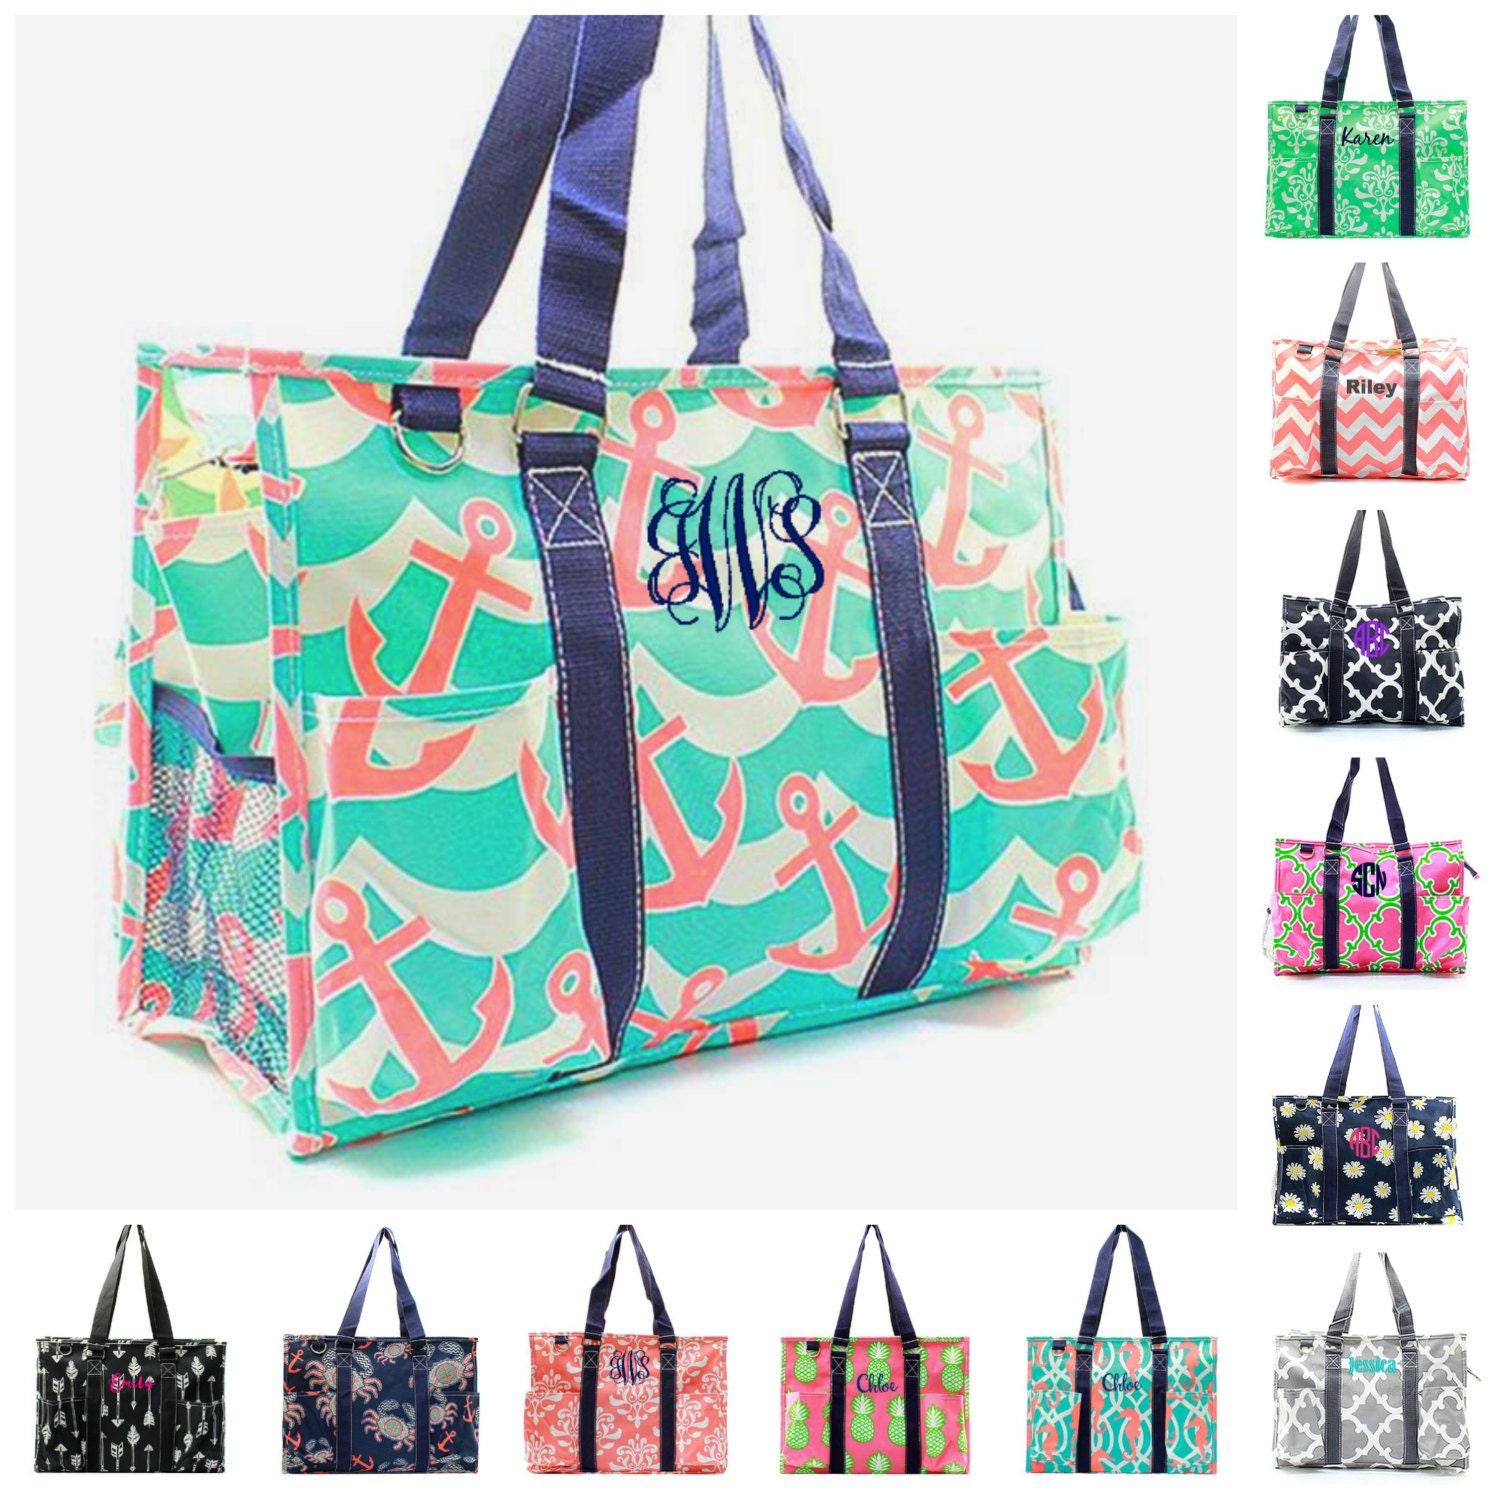 Monogrammed Large Beach Bag Organizing Utility by GiftsHappenHere